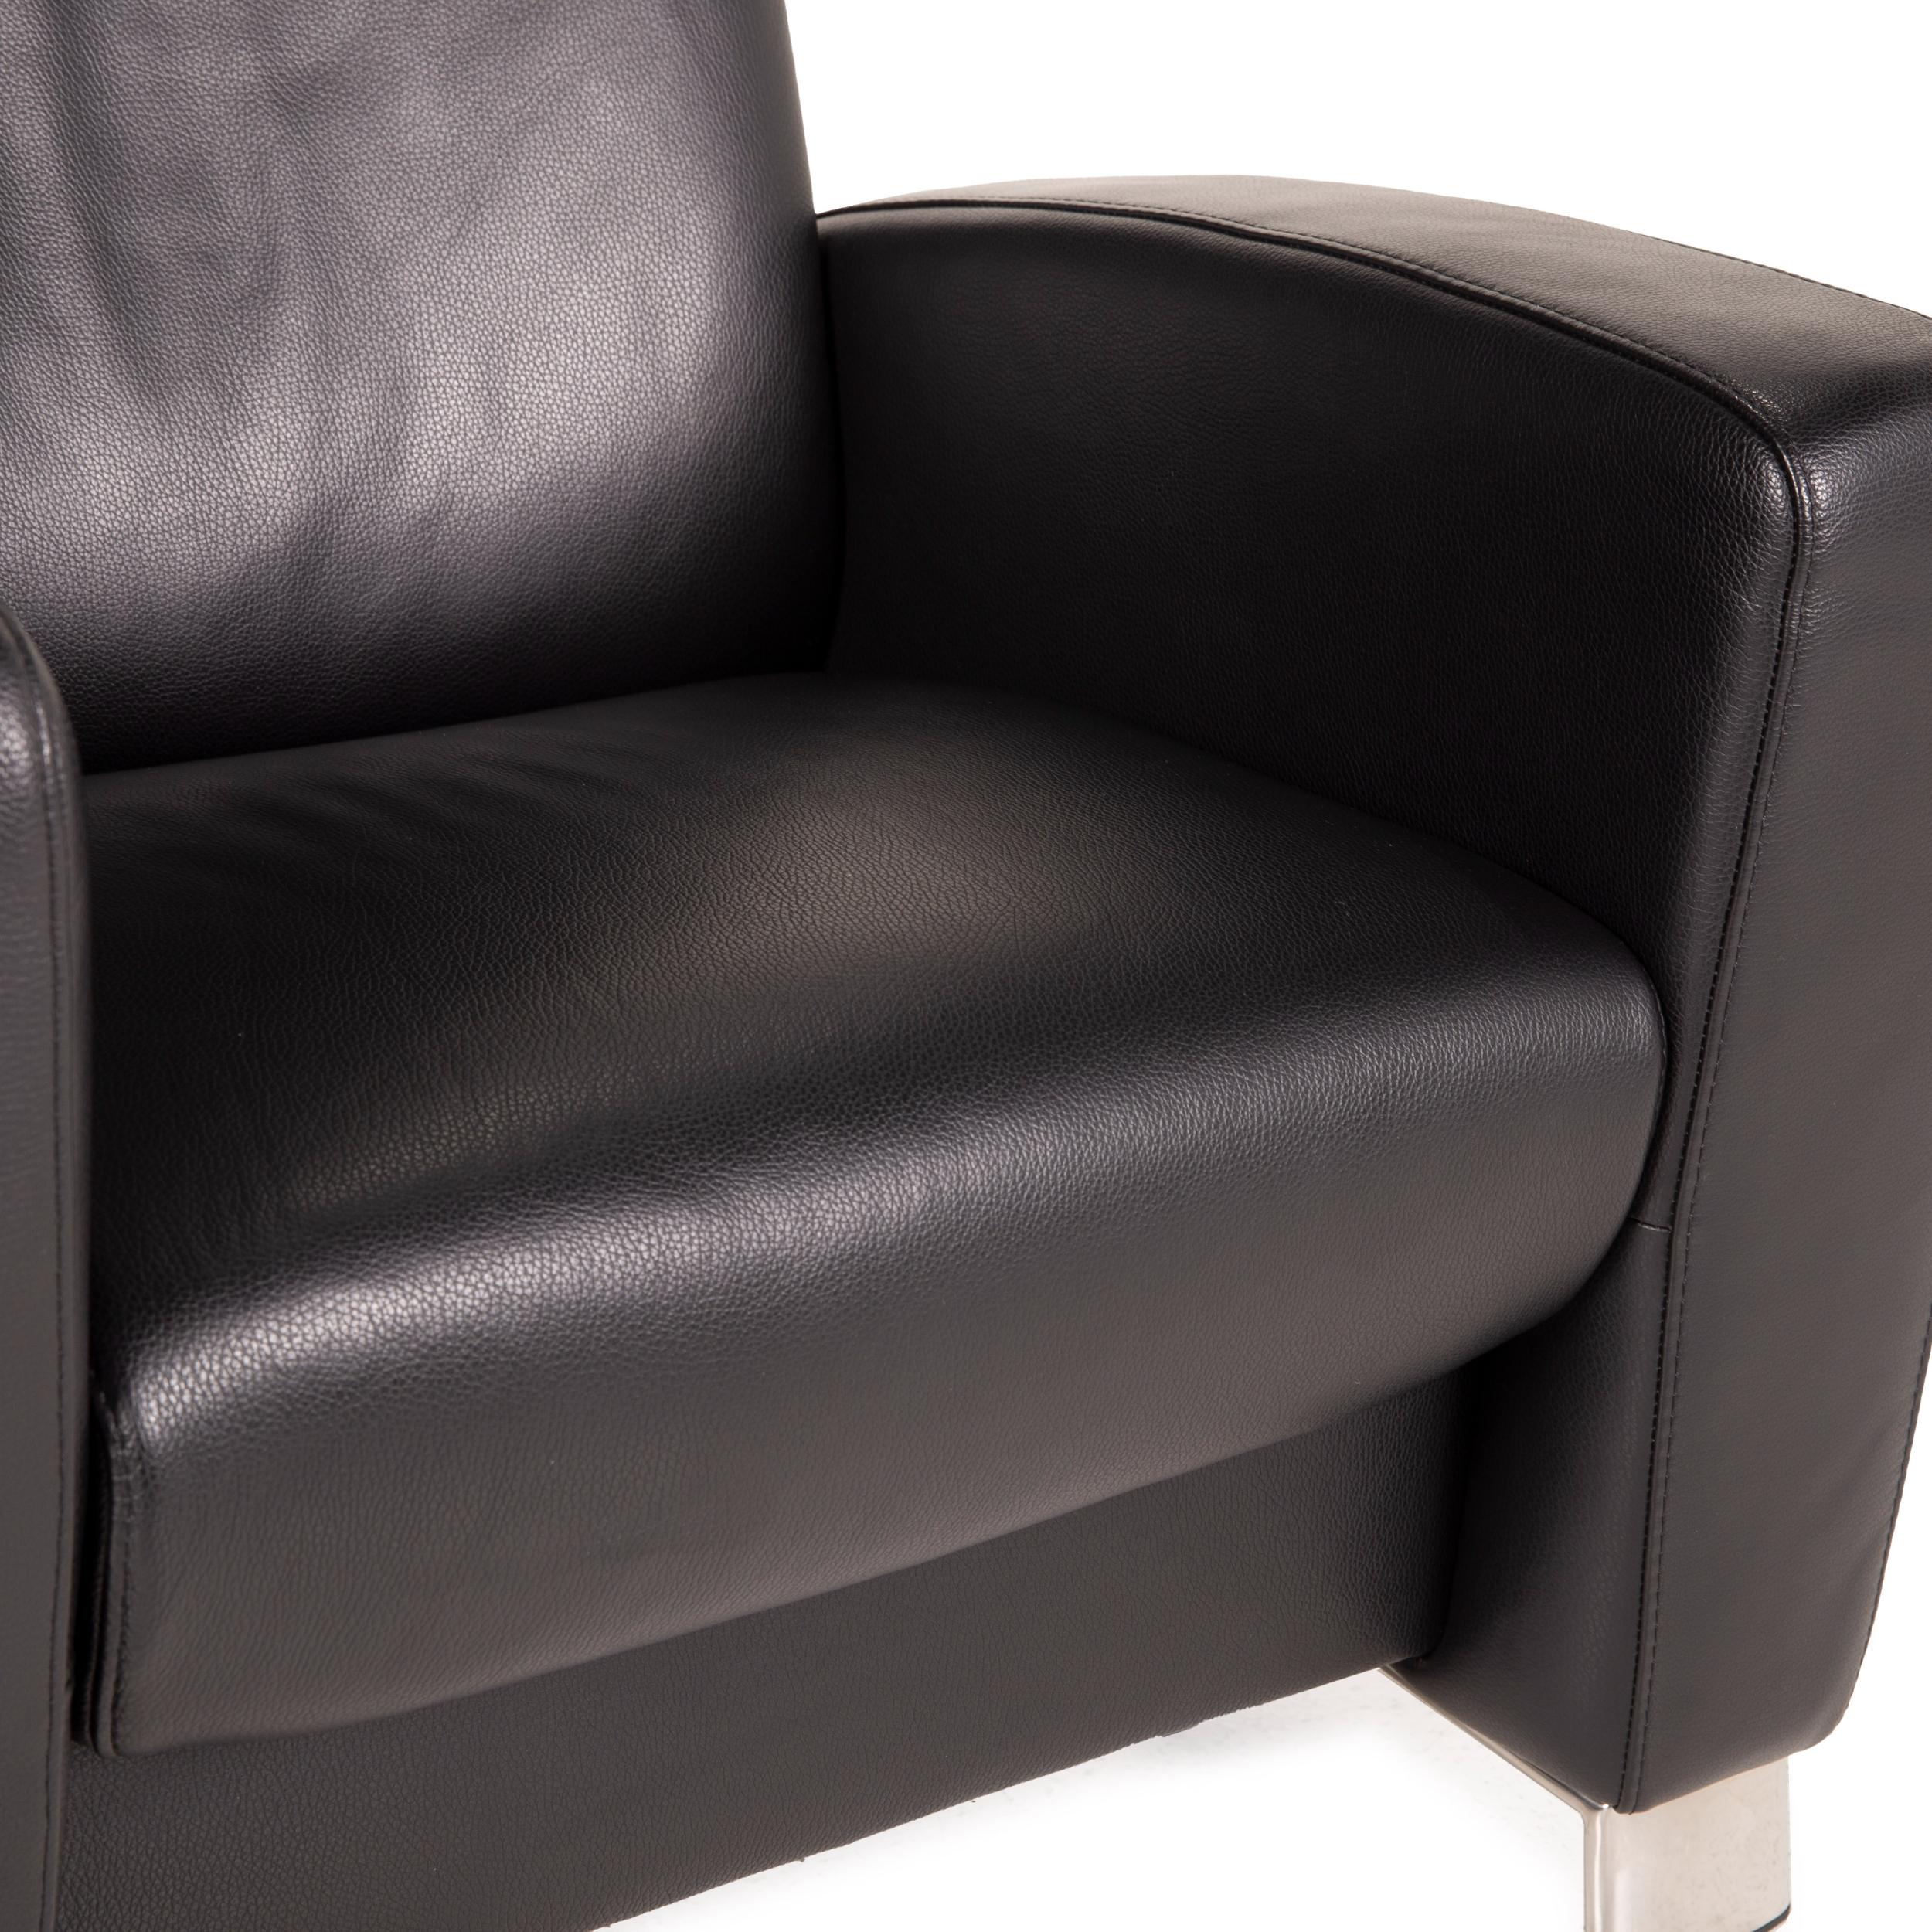 Modern Stressless Arion Leather Armchair Black Relax Function For Sale